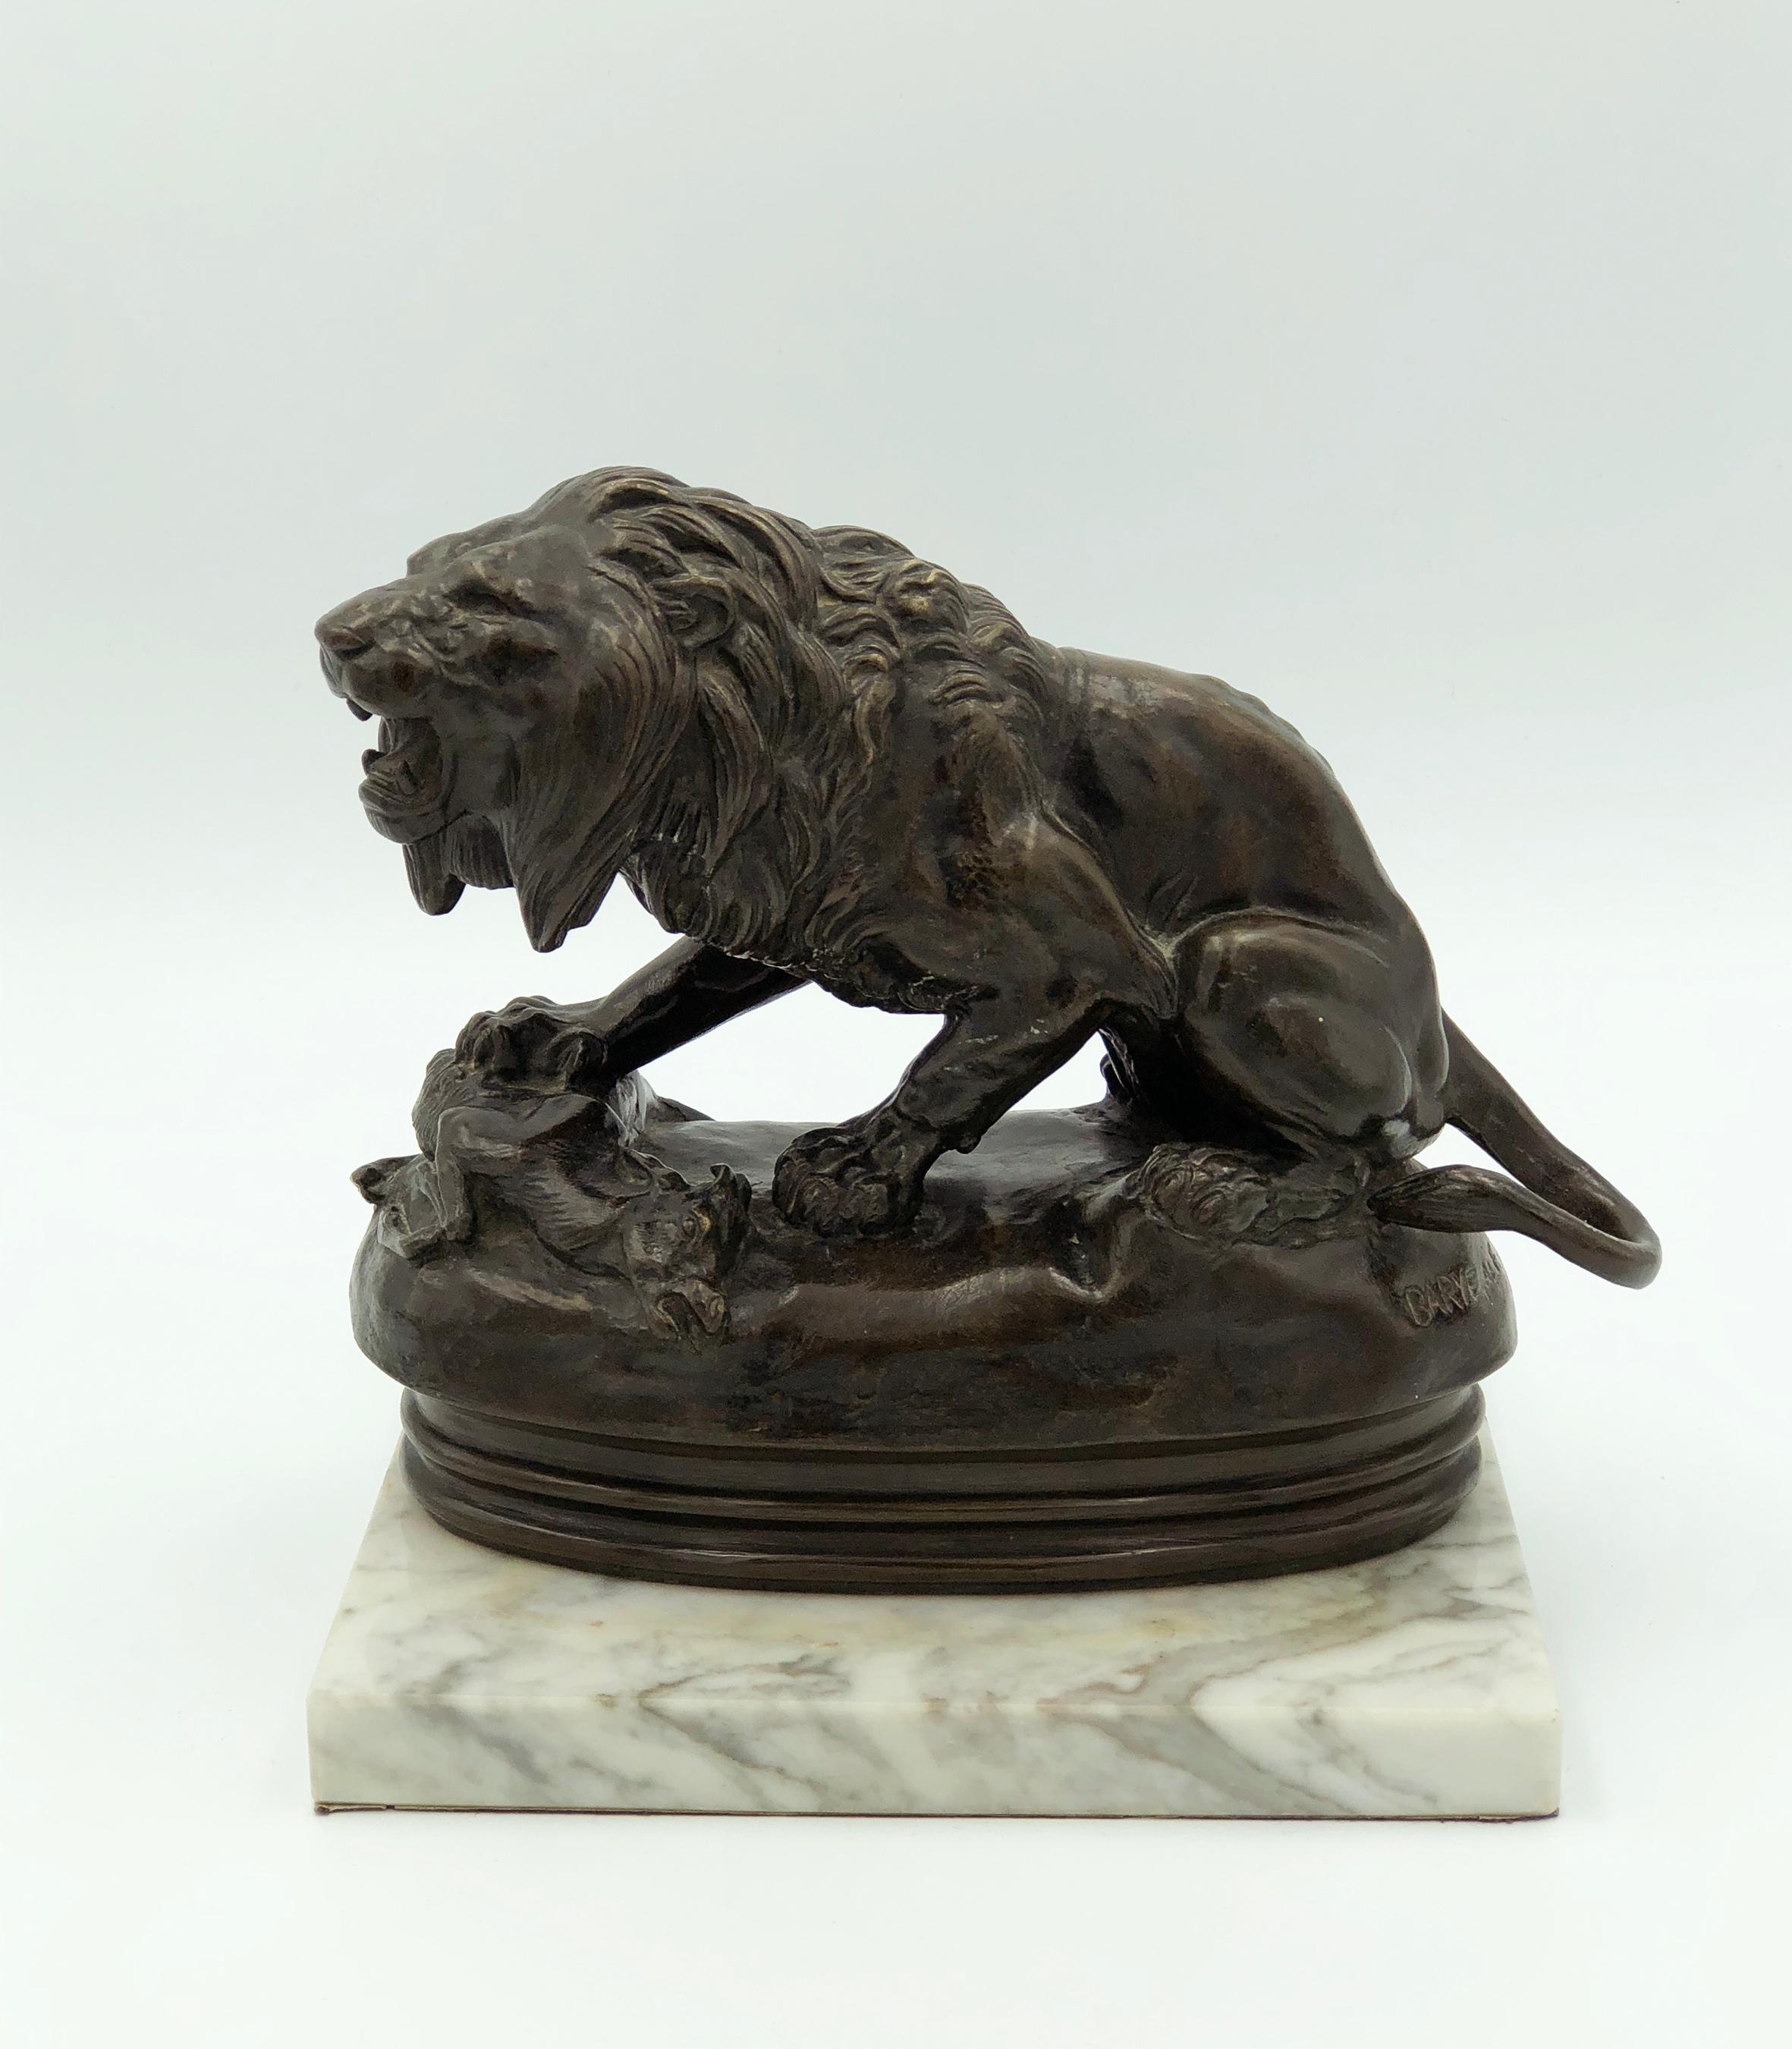 Lion and Antelope (No. 23) - Sculpture by Antoine-Louis Barye